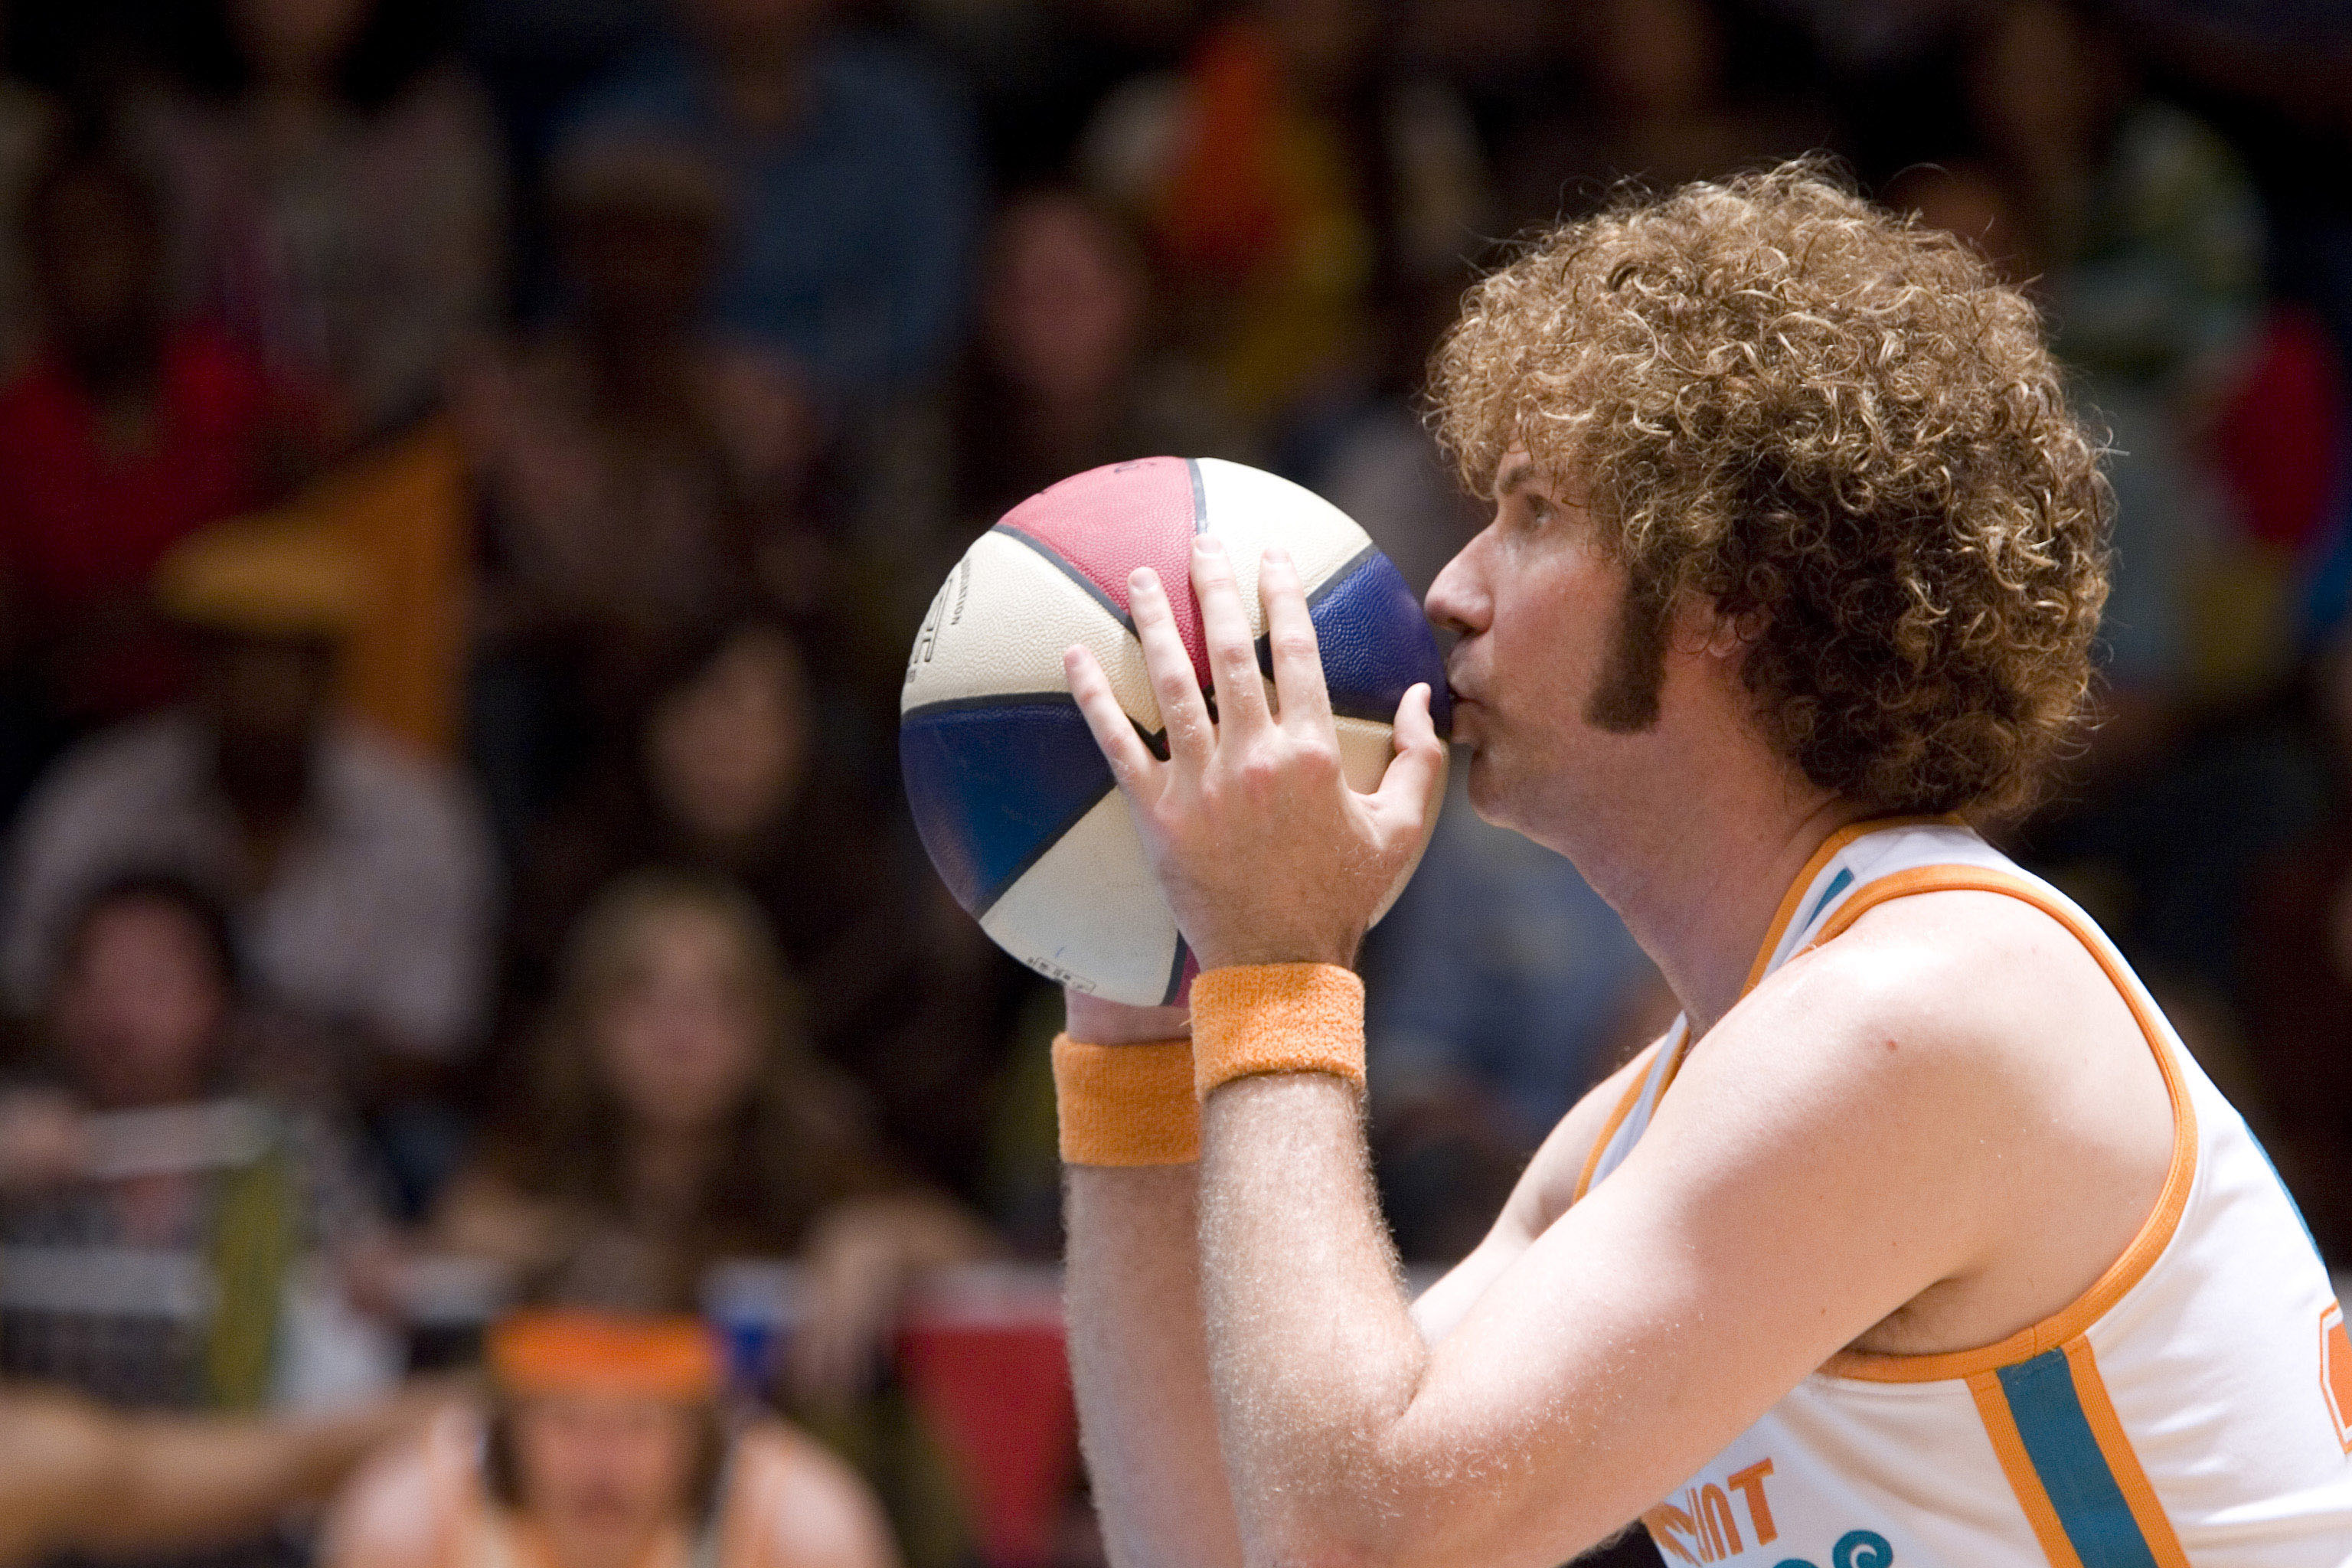 <p>In 2008's "Semi-Pro," Will Ferrell starred as Jackie Moon, the owner, player and coach of the failing Flint Michigan Tropics. In addition to being a basketball triple-threat, Jackie was also famous for the aging disco hit "Love Me Sexy." Unfortunately, the character fell flat. "Semi-Pro" is considered to be one of Will's least funny movies, grossing $43 million against a $55 million budget.</p>